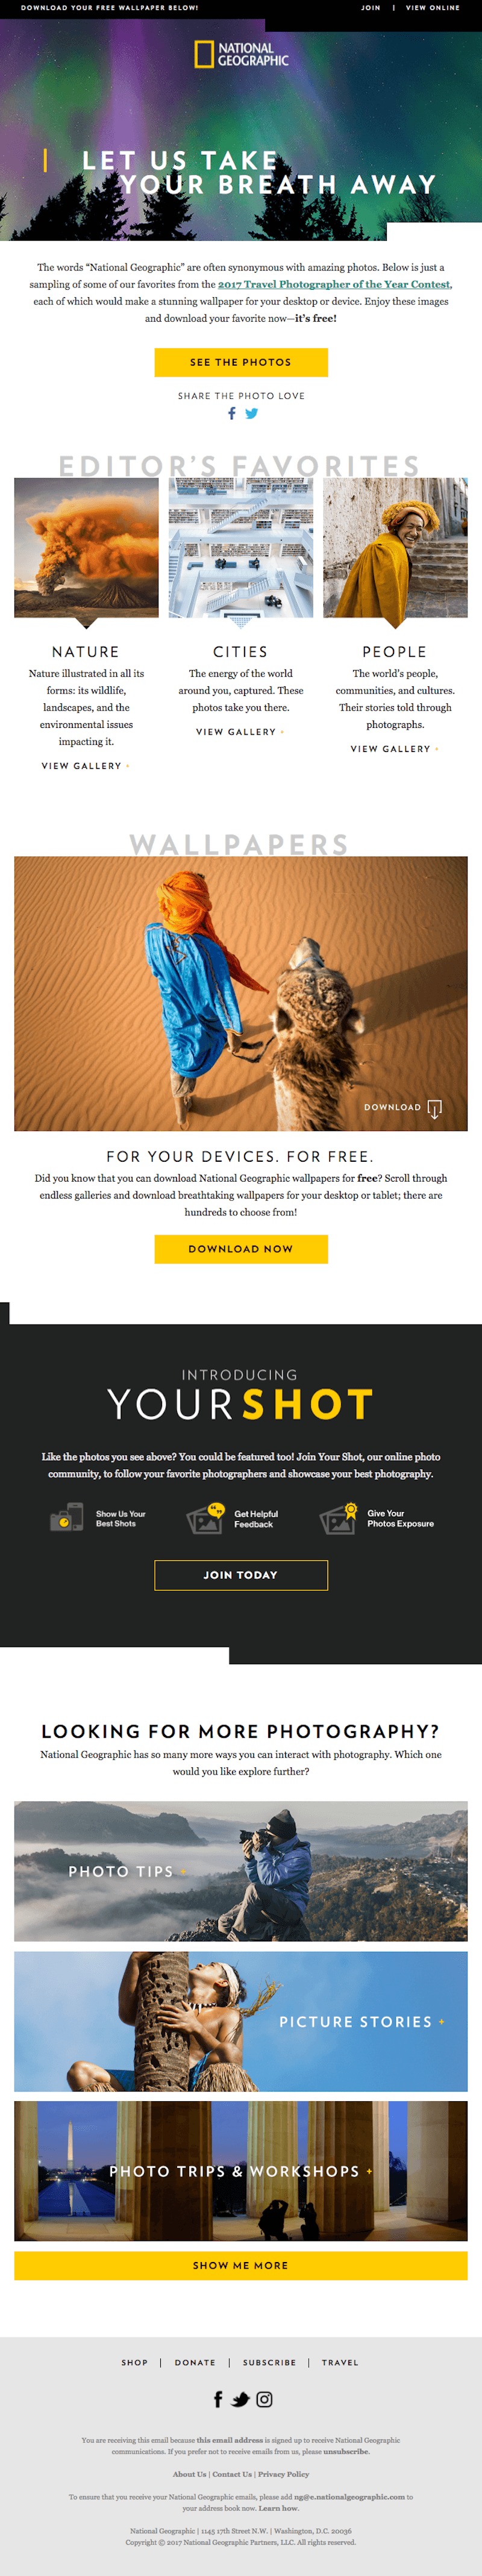 Email from National Geographic that includes links to educational content about photography